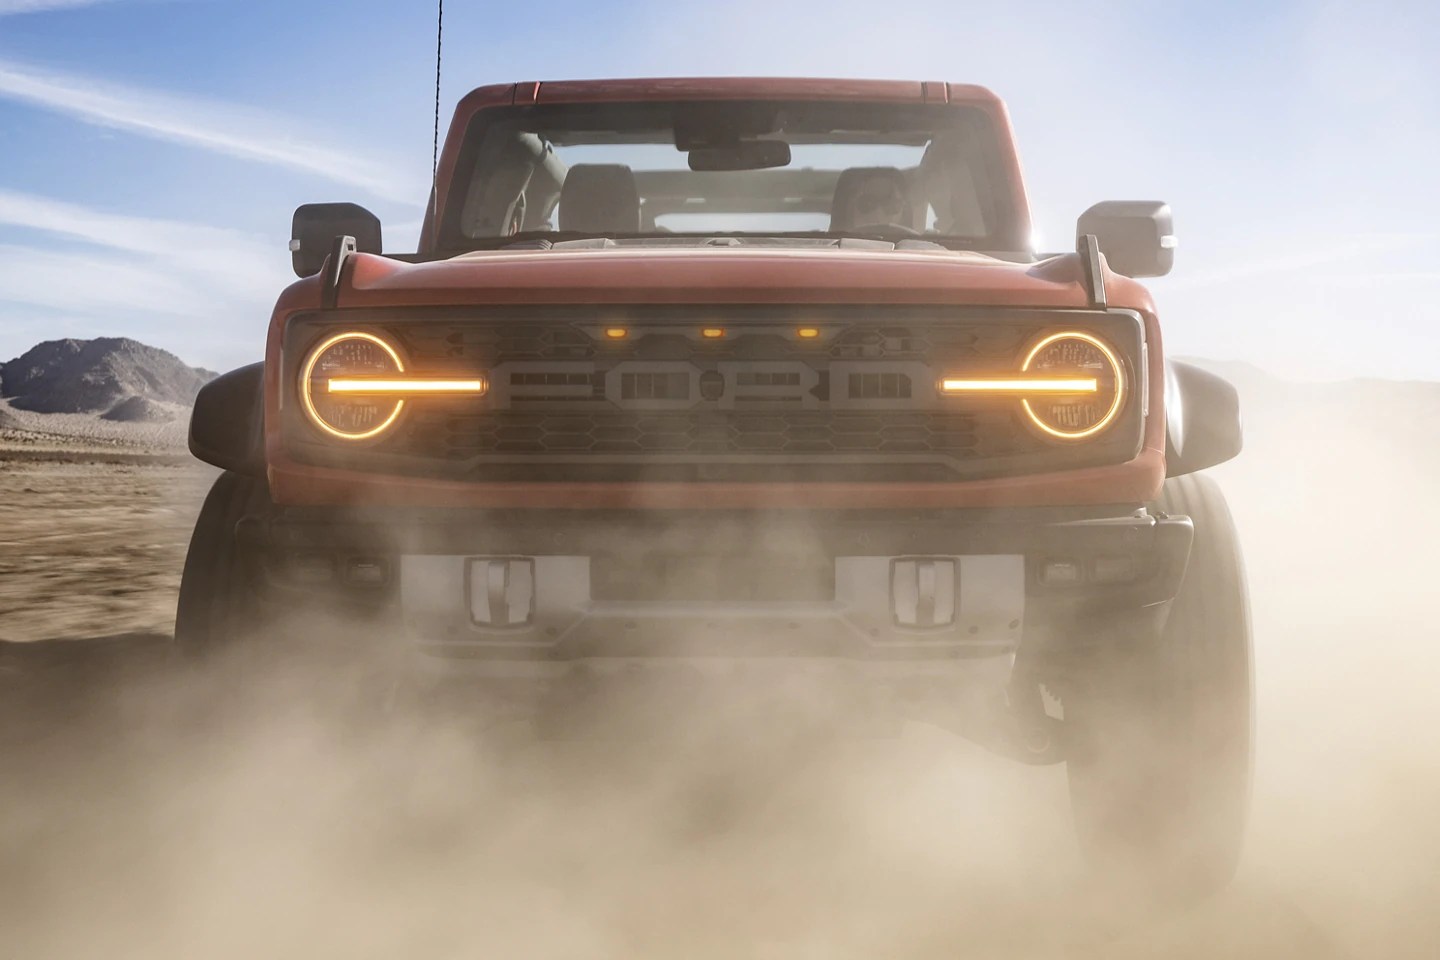 A 2022 Ford Bronco Raptor shows off as an off-road SUV with high performance.